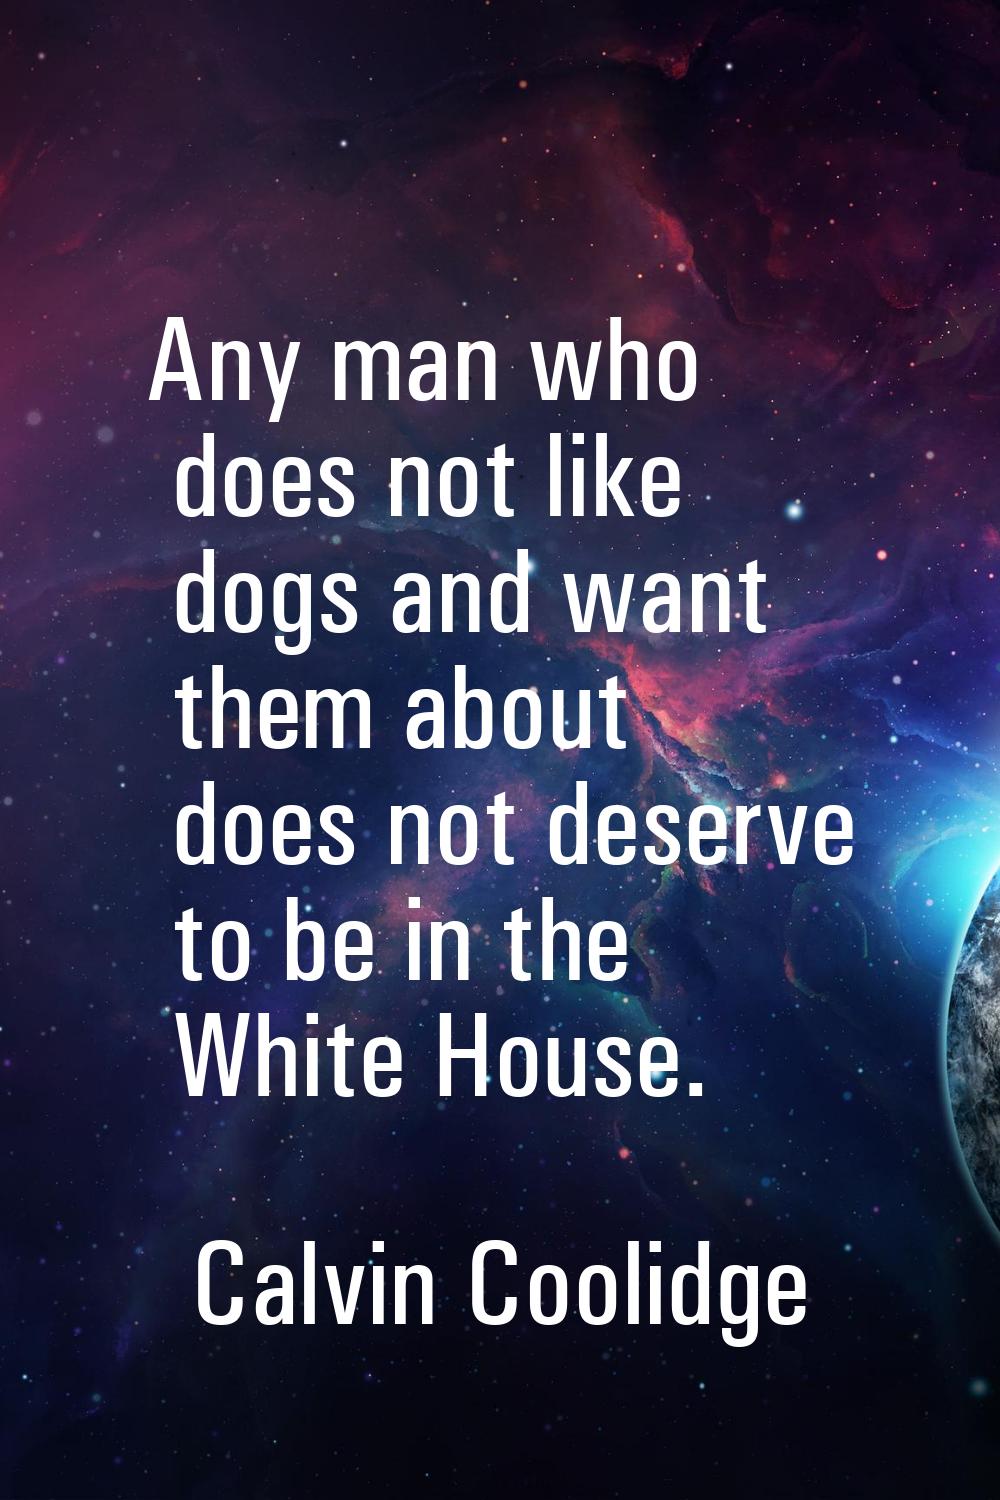 Any man who does not like dogs and want them about does not deserve to be in the White House.